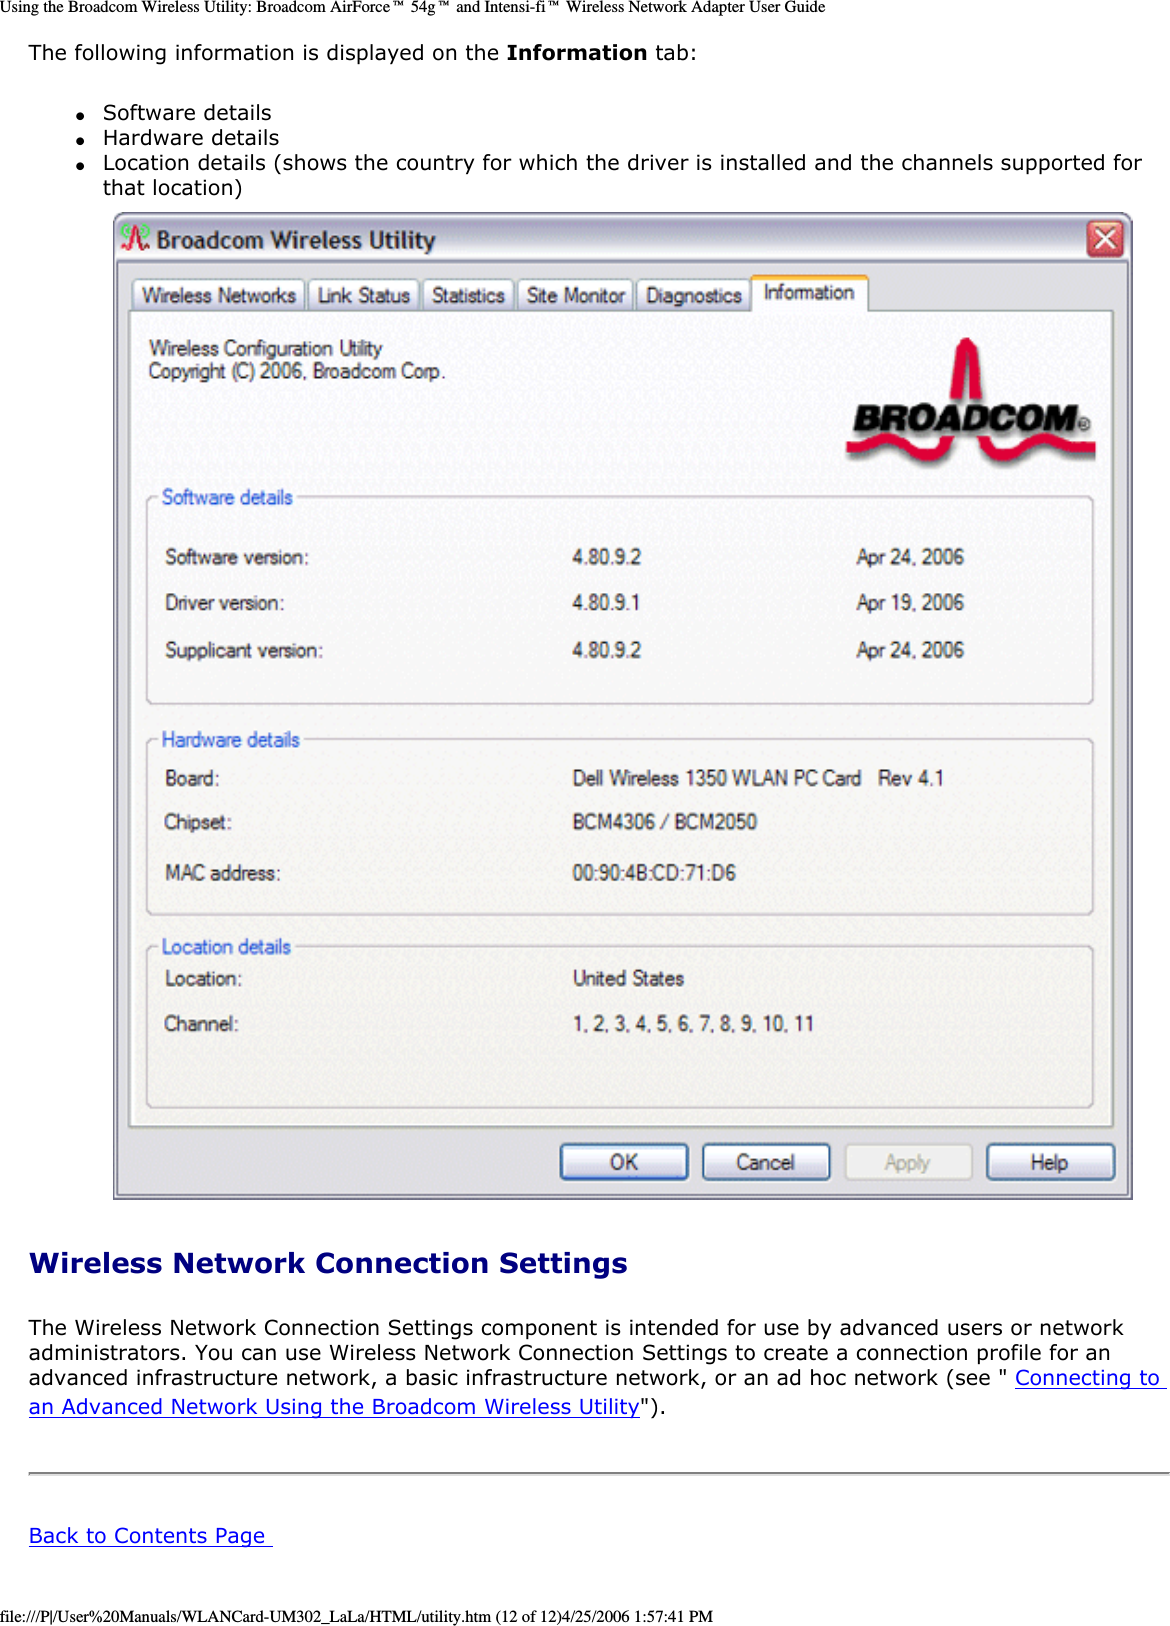 Using the Broadcom Wireless Utility: Broadcom AirForce™ 54g™ and Intensi-fi™ Wireless Network Adapter User GuideThe following information is displayed on the Information tab: ●     Software details ●     Hardware details ●     Location details (shows the country for which the driver is installed and the channels supported for that location)  Wireless Network Connection Settings The Wireless Network Connection Settings component is intended for use by advanced users or network administrators. You can use Wireless Network Connection Settings to create a connection profile for an advanced infrastructure network, a basic infrastructure network, or an ad hoc network (see &quot; Connecting to an Advanced Network Using the Broadcom Wireless Utility&quot;).             Step 1: Installing the Software   NOTE: This installation is required before you insert the module into the USB port of your computer.  1. Insert the Bluetooth USB Module installation compact disc (CD) into the CD-ROM or DVD drive of your computer. 2. If the Main Menu screen appears automatically, select Install software and click OK. If the Main Menu screen does not appear automatically, click Start, click Run, type x:\setup.exe (where x is the CD-ROM or DVD drive letter of your computer), and click OK. 3. Click Next, click Finish, and then restart your computer. 4. Right-click the Bluetooth icon  in the taskbar notification area (system tray) and click Start Using Bluetooth. Follow the instructions provided by the Initial Bluetooth Configuration Wizard.  Back to Contents Page file:///P|/User%20Manuals/WLANCard-UM302_LaLa/HTML/utility.htm (12 of 12)4/25/2006 1:57:41 PM